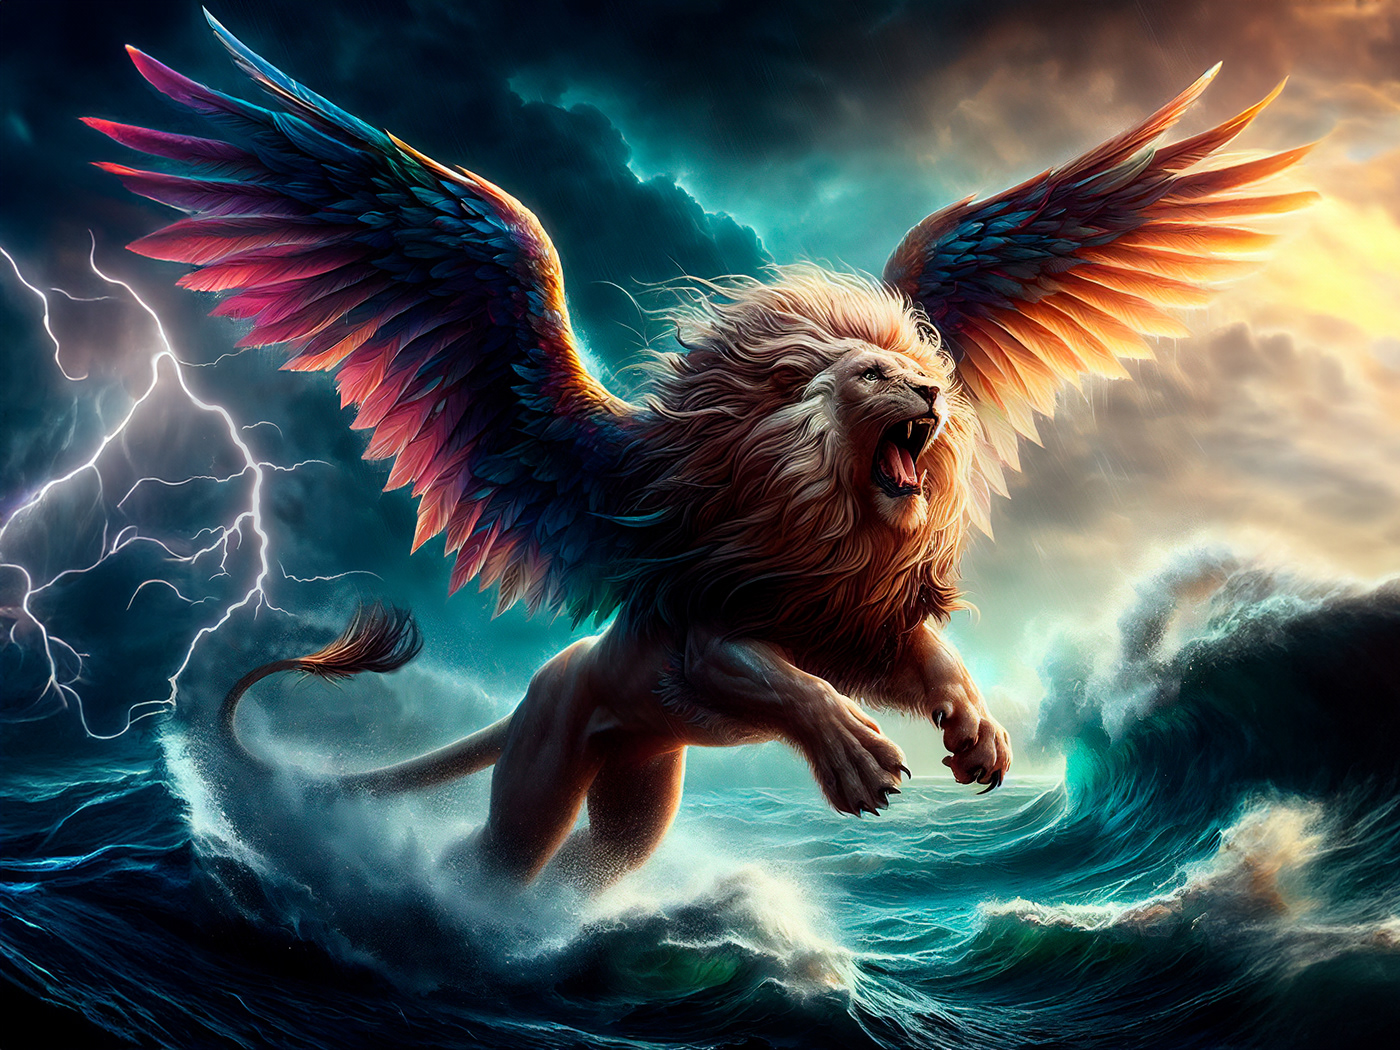 "The first was like a lion and had eagles' wings" (Dan 7:4).